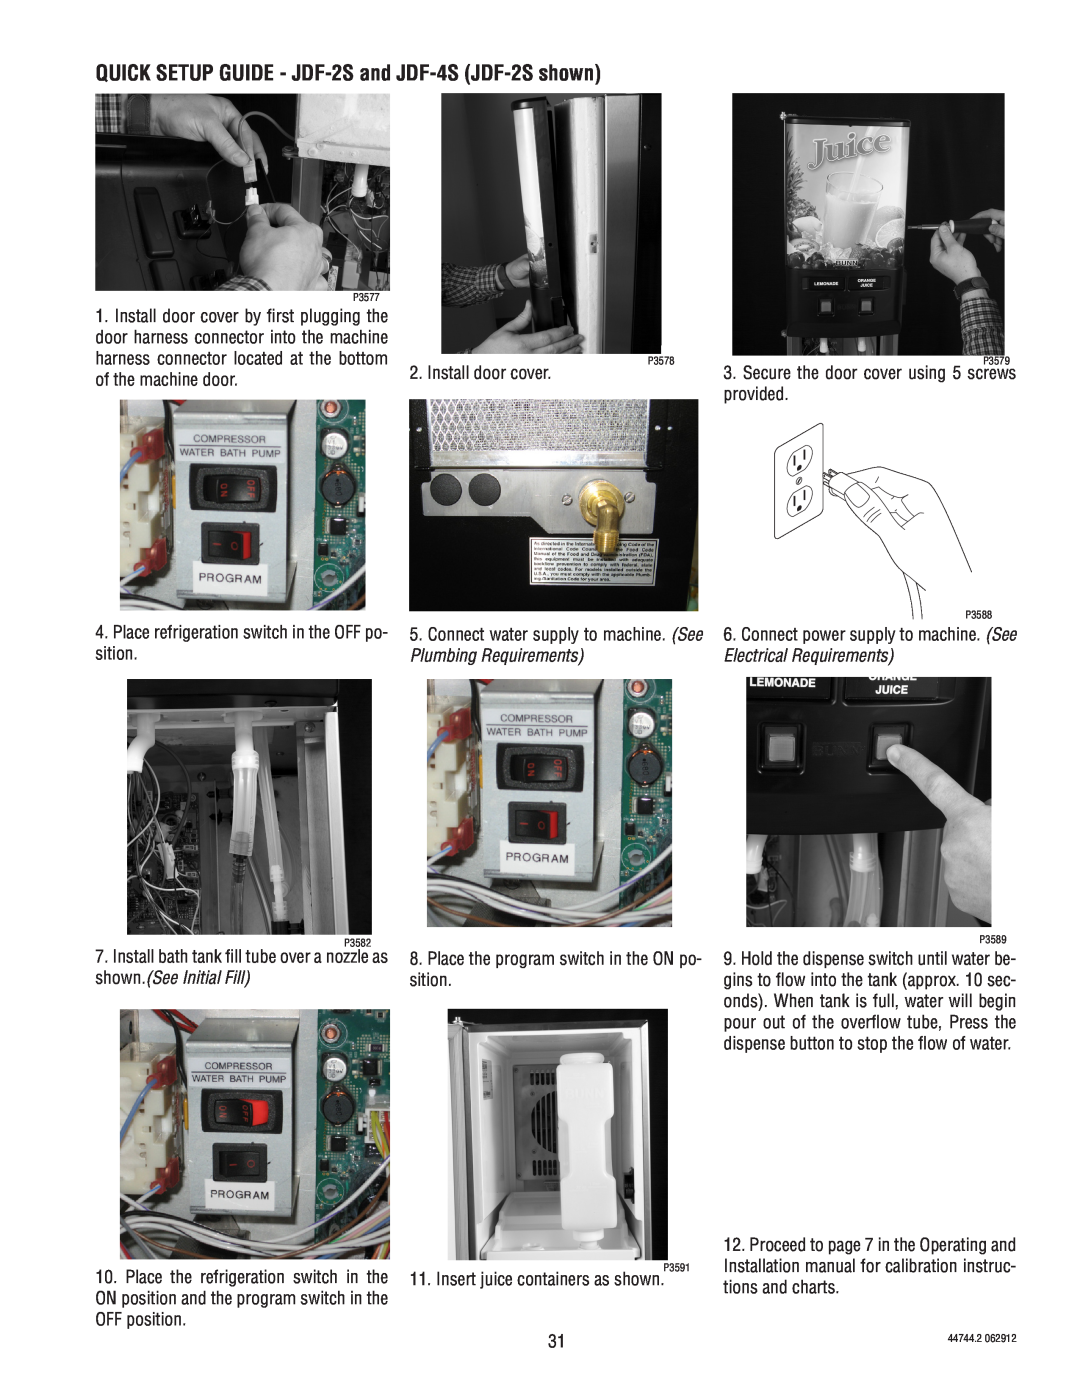 Bunn service manual QUICK SETUP GUIDE - JDF-2Sand JDF-4S JDF-2Sshown, Plumbing Requirements, shown.See Initial Fill 